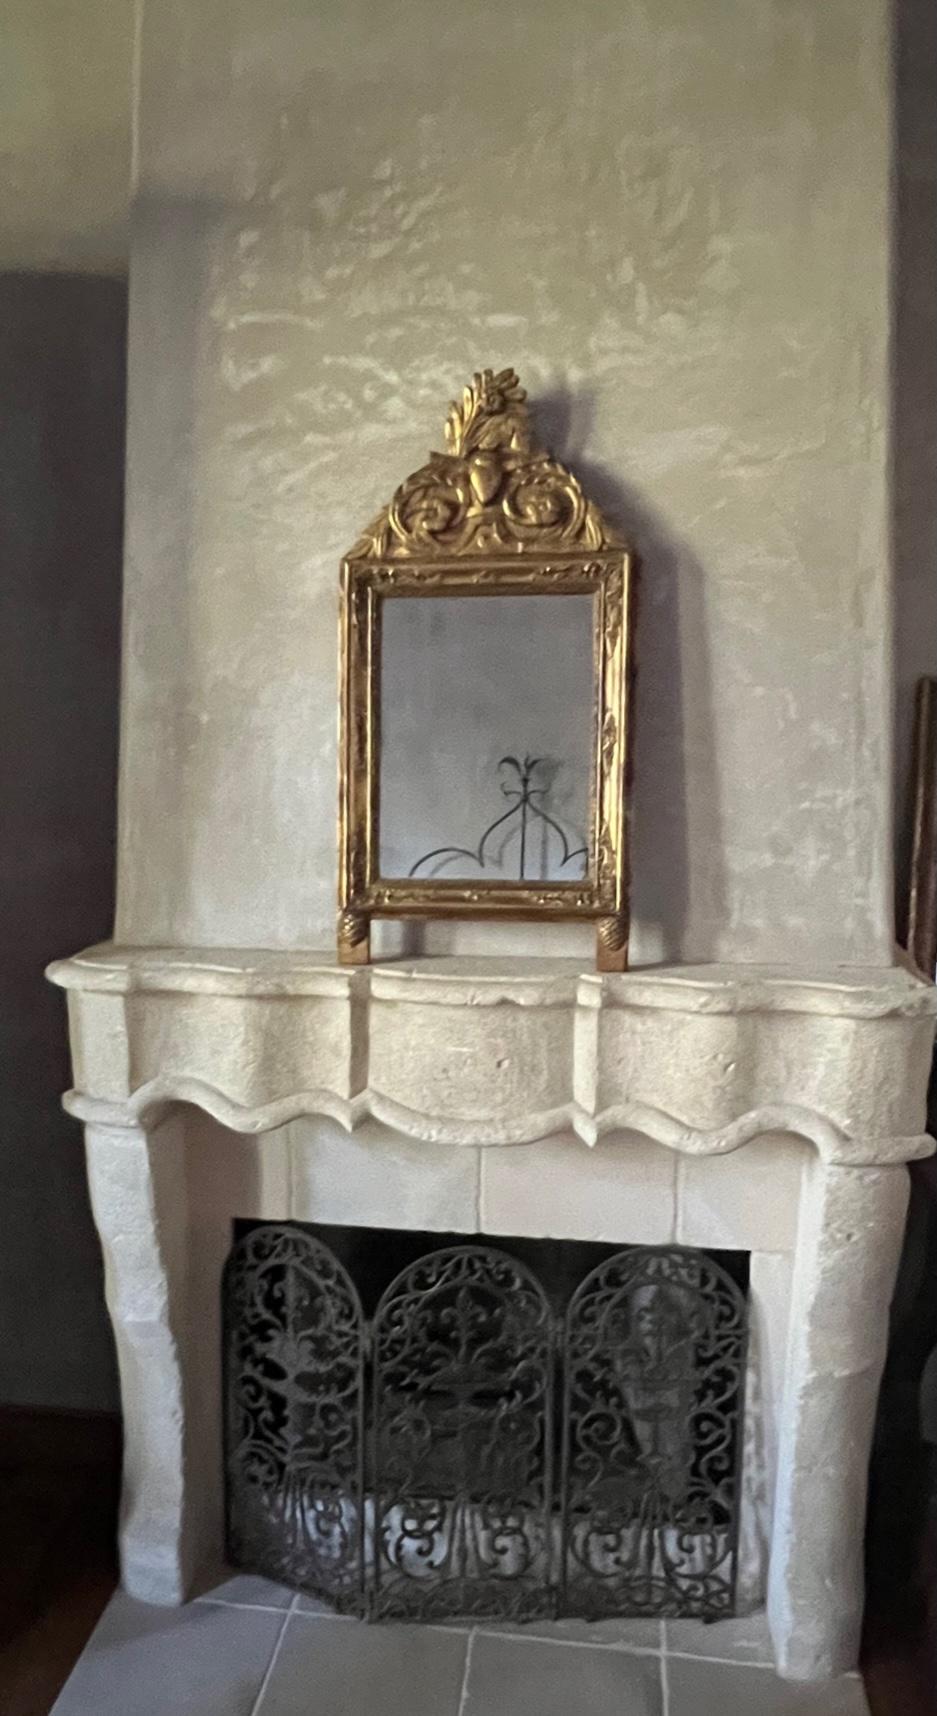 Antique French bridal mirror, hand carved wood top with a design of leaves, flowers and a heart in the center. The glass is antique as well as the frame and shows some discoloration and spotting indicative of mercury glass.